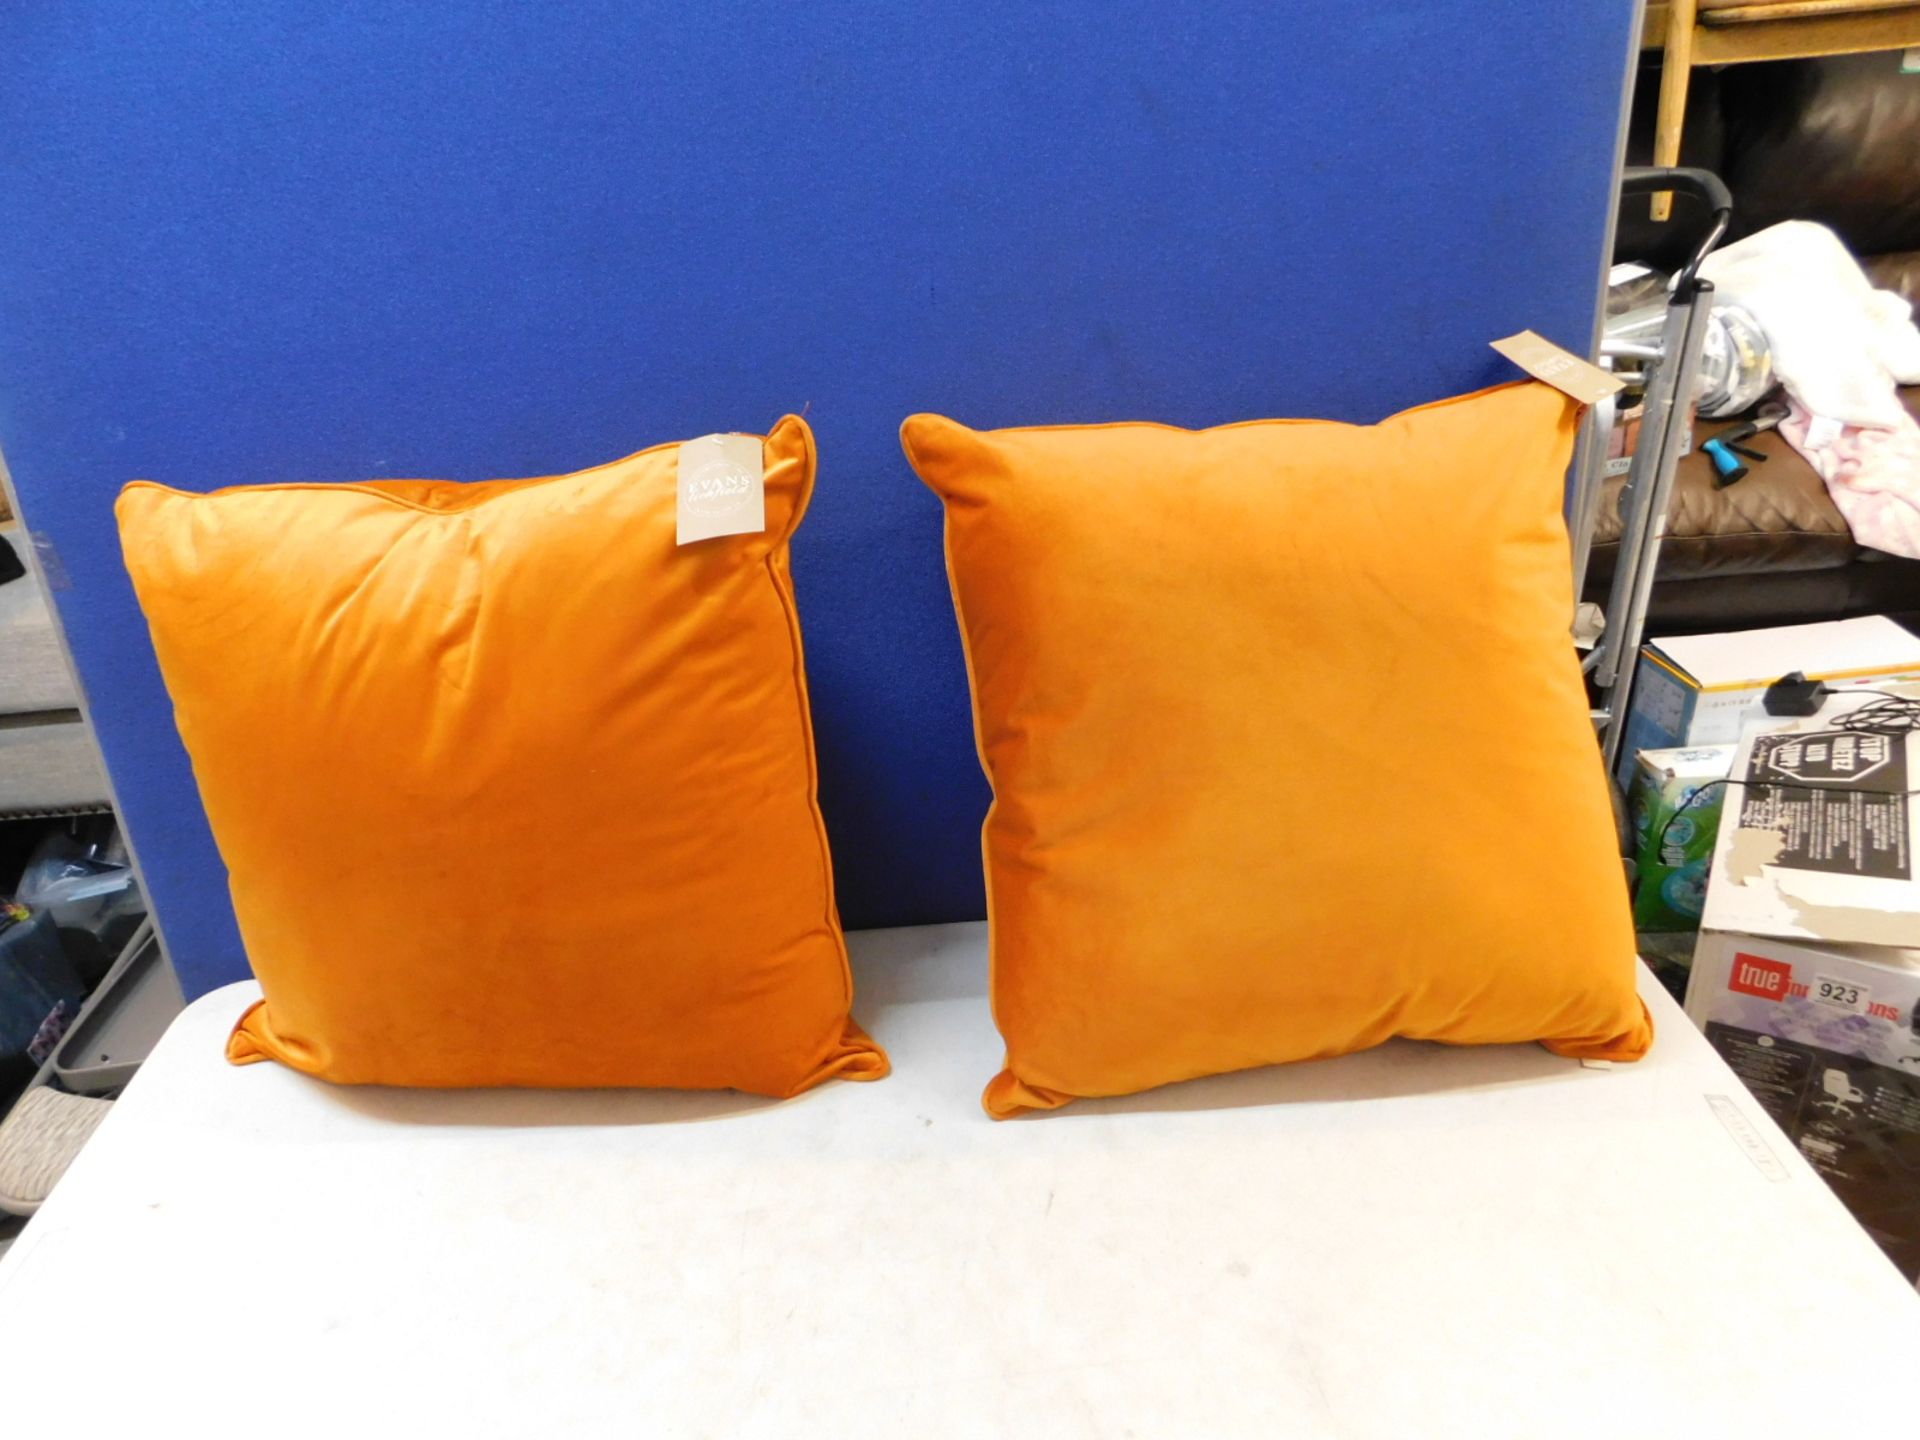 1 PAIR OF EVANS LICHFIELD CUSHIONS IN TANGERINE COLOUR (SIZE 55X55) RRP Â£59.99